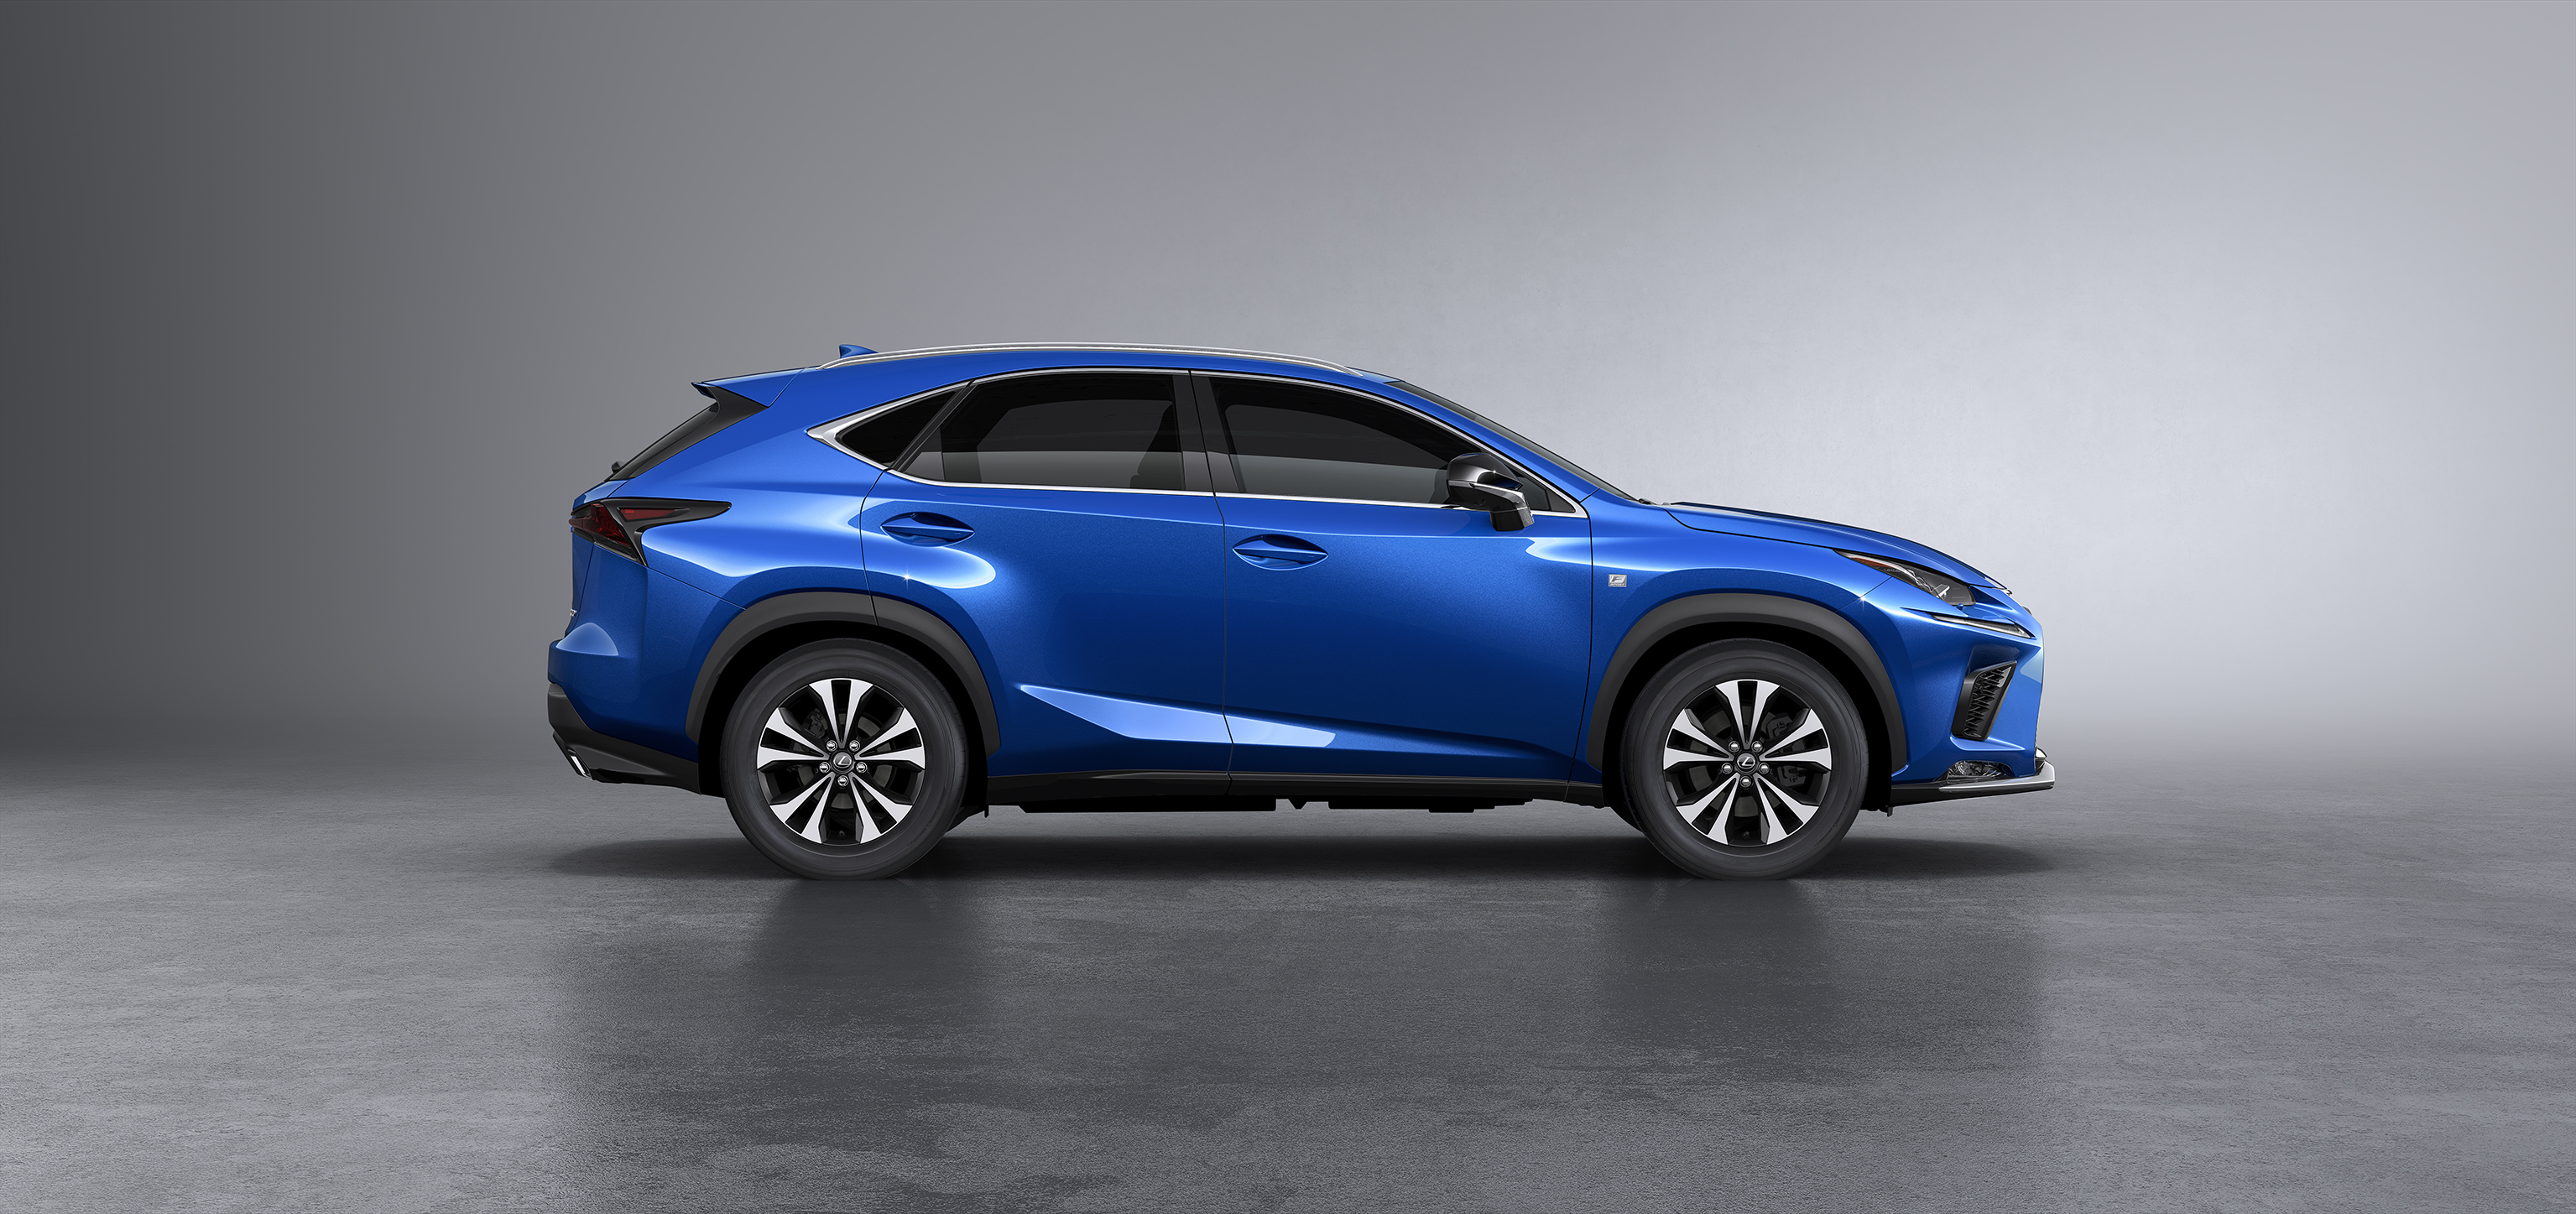 19 Lexus Nx Review Ratings Specs Prices And Photos The Car Connection